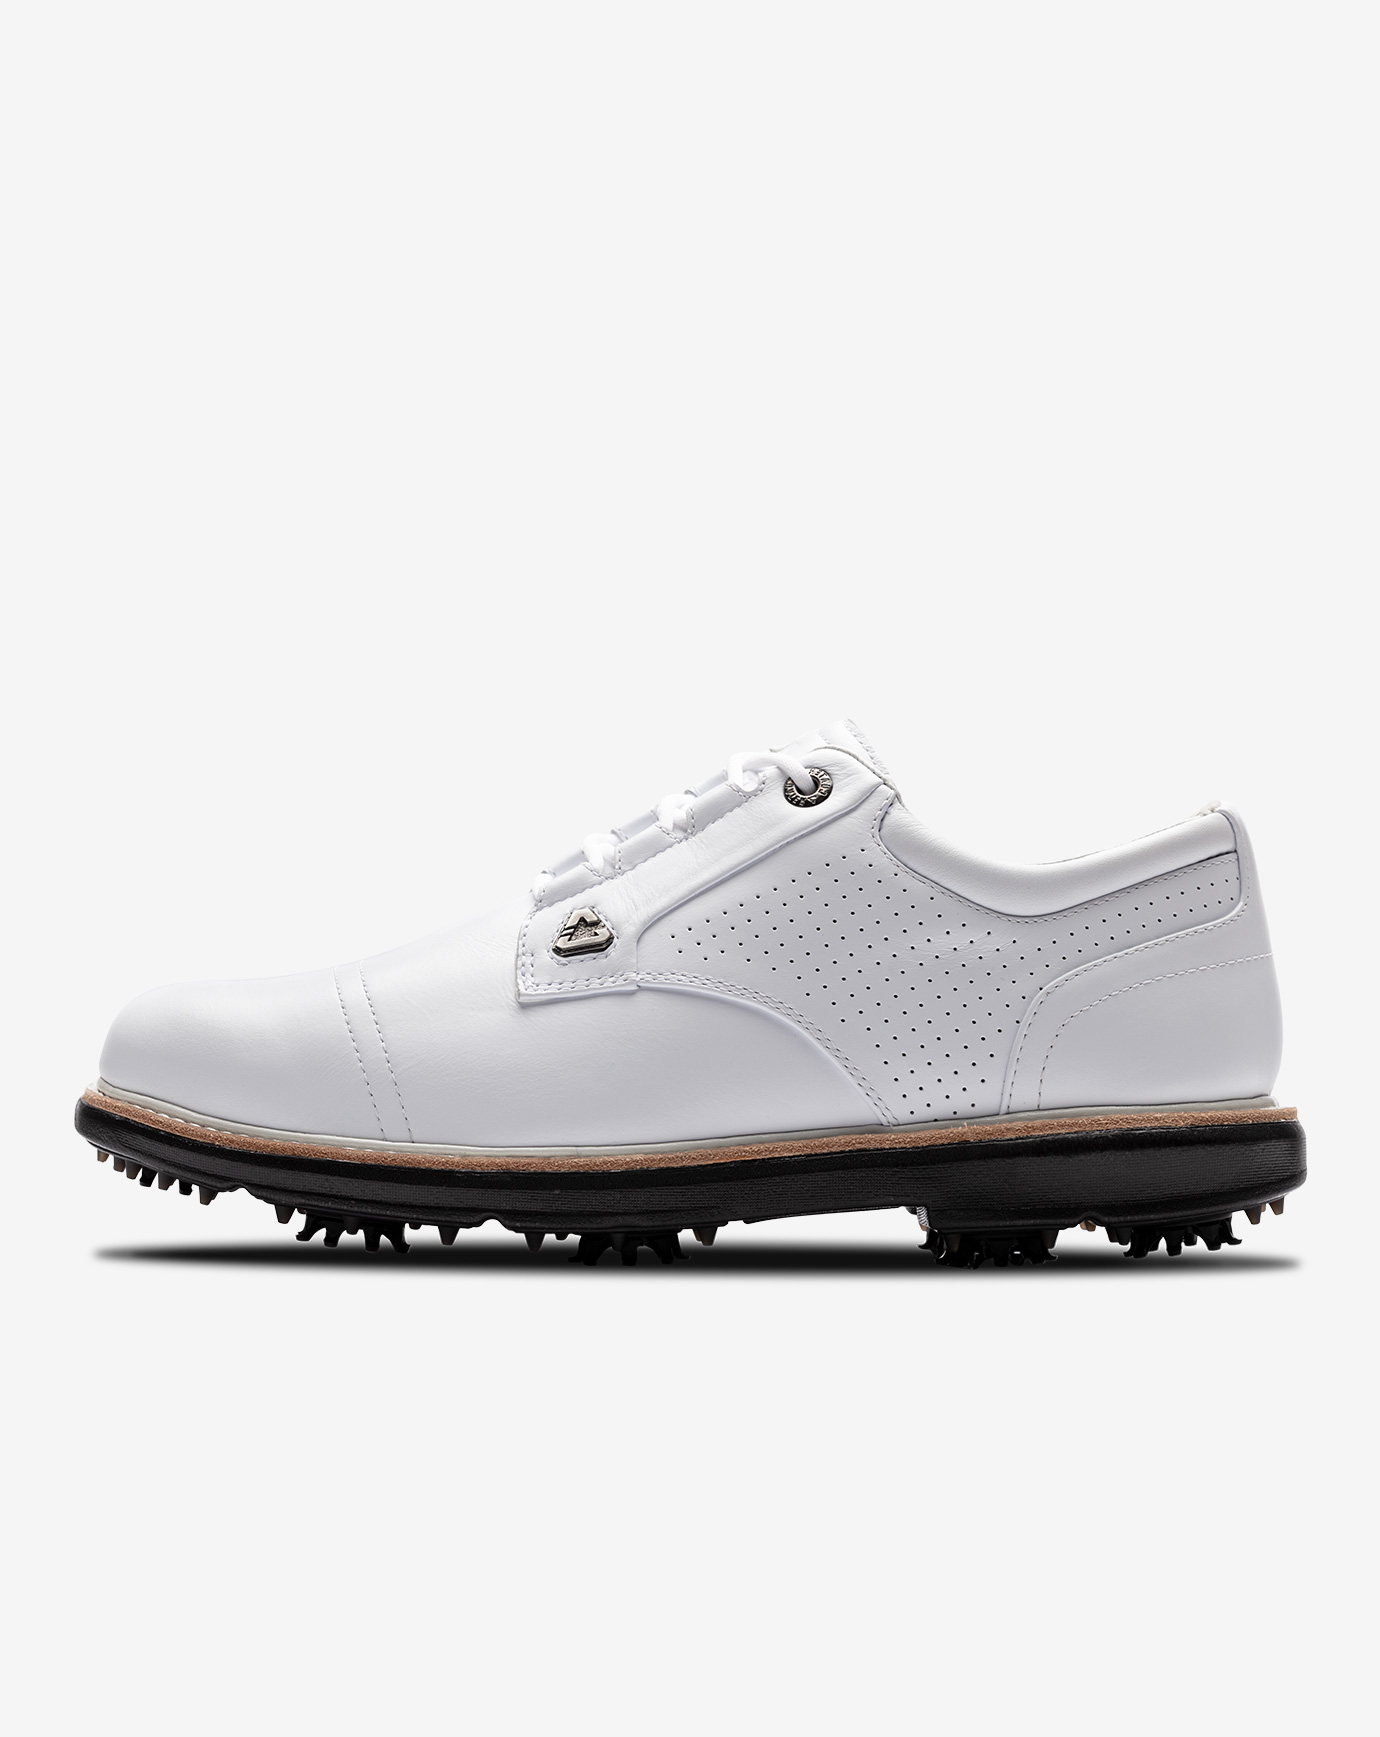 THE LEGEND SPIKED GOLF SHOE 1